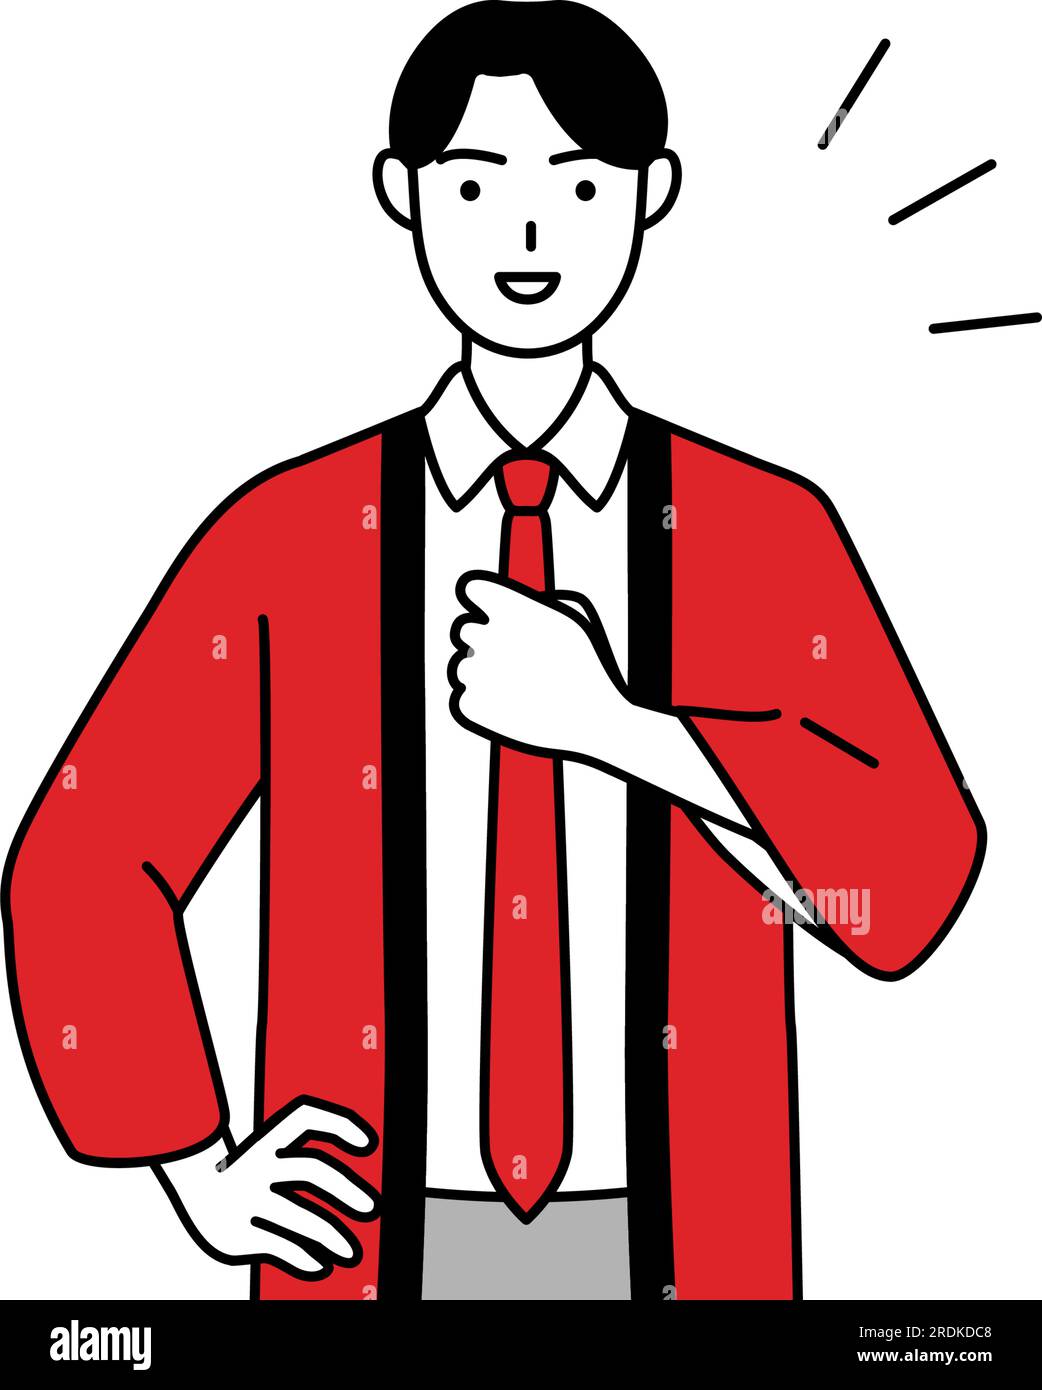 Man wearing a red happi coat tapping his chest, Vector Illustration Stock Vector